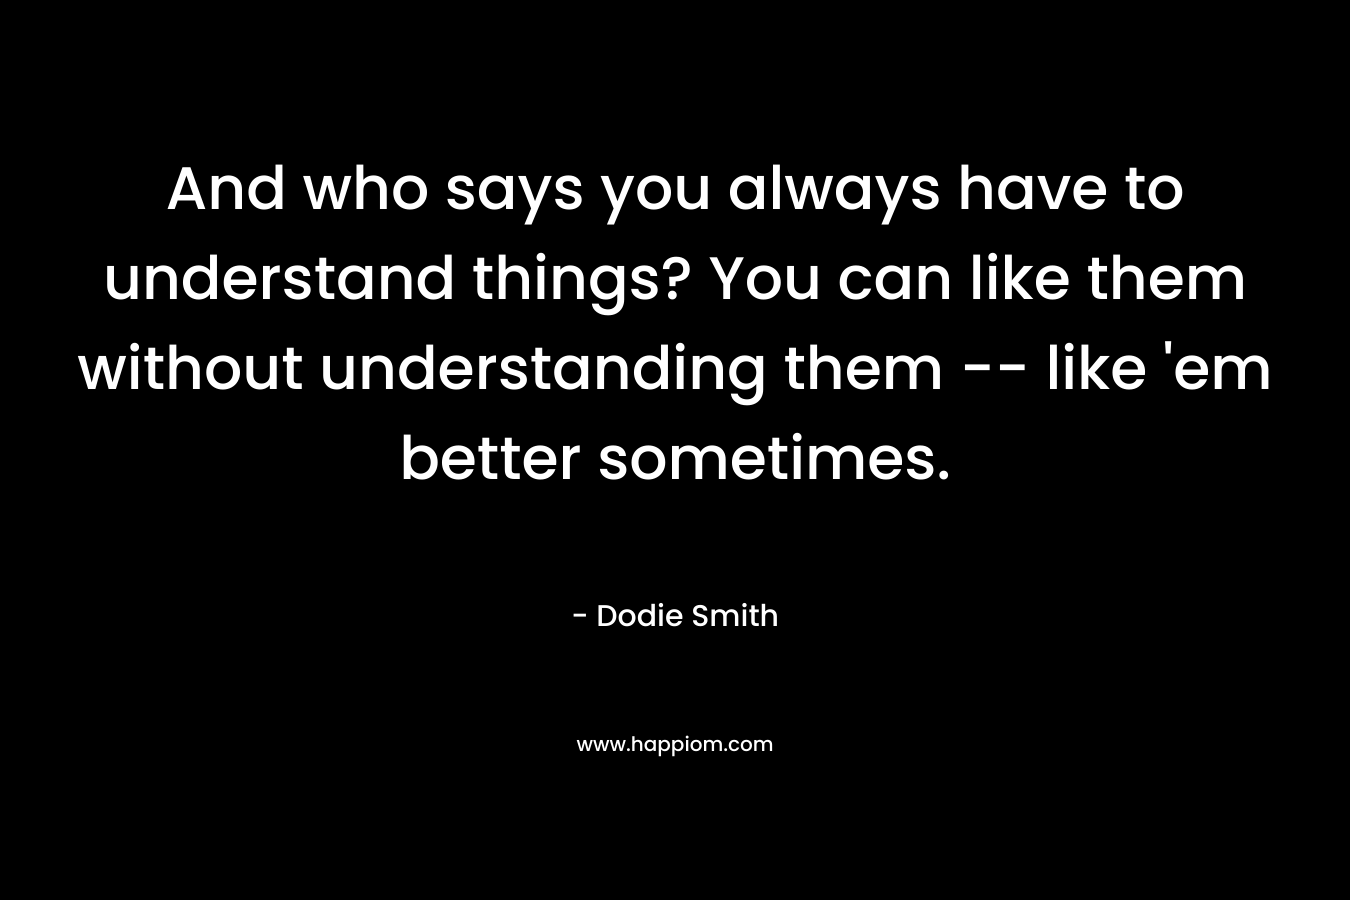 And who says you always have to understand things? You can like them without understanding them — like ’em better sometimes. – Dodie Smith